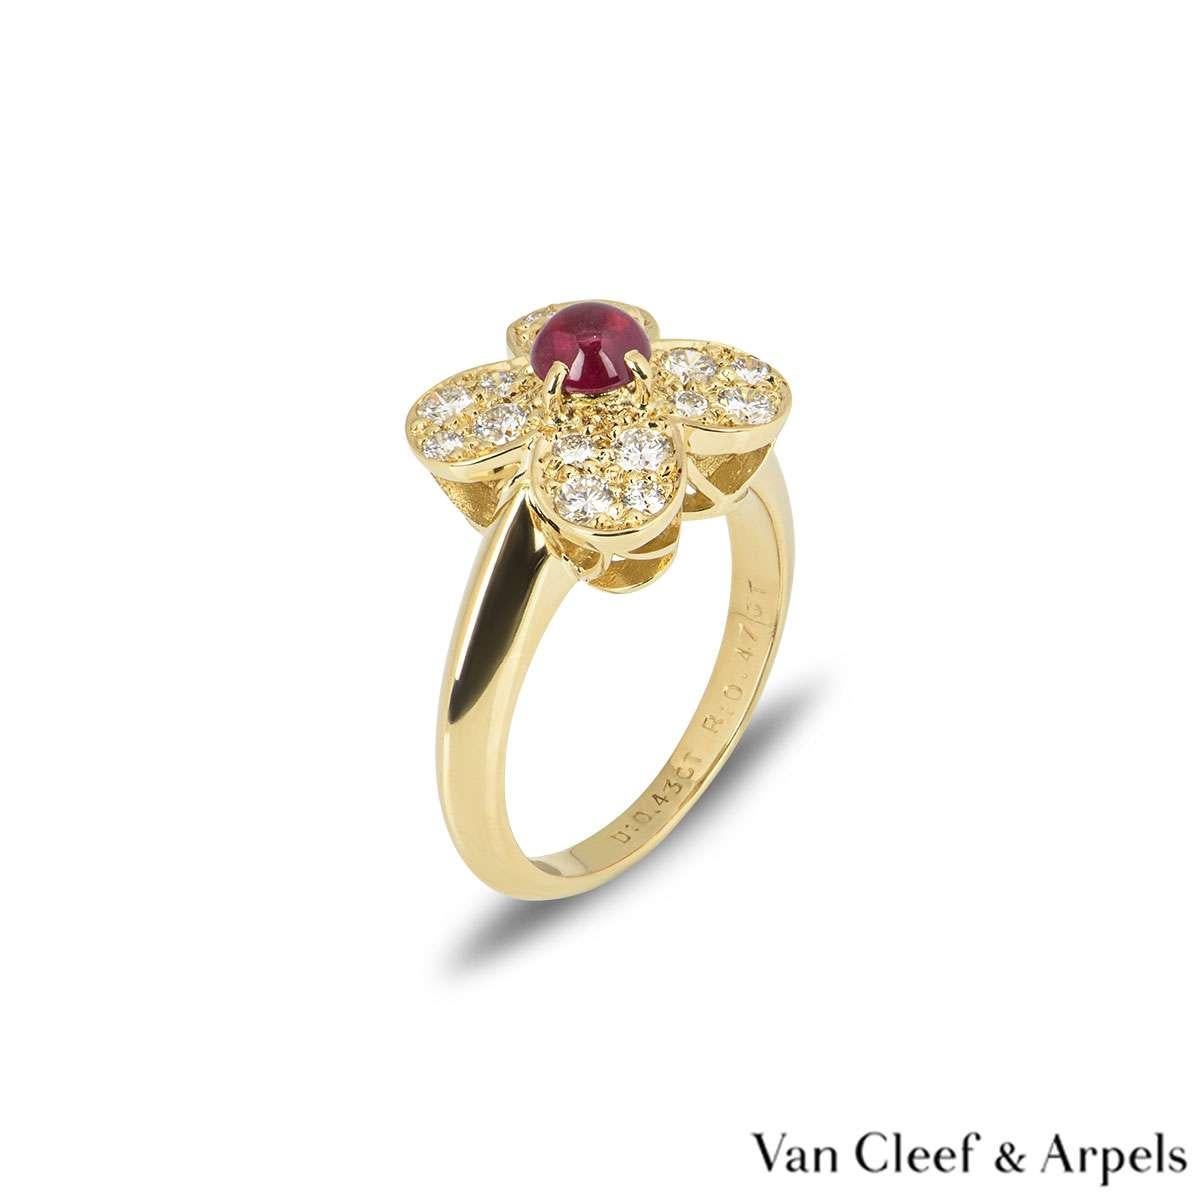 A beautiful 18k yellow gold Van Cleef & Arpels diamond ring from the Alhambra collection. The flower motif is set with a single claw set ruby weighing 0.47ct. The petals of the flower are pave set with round brilliant cut diamonds totalling 0.43ct.